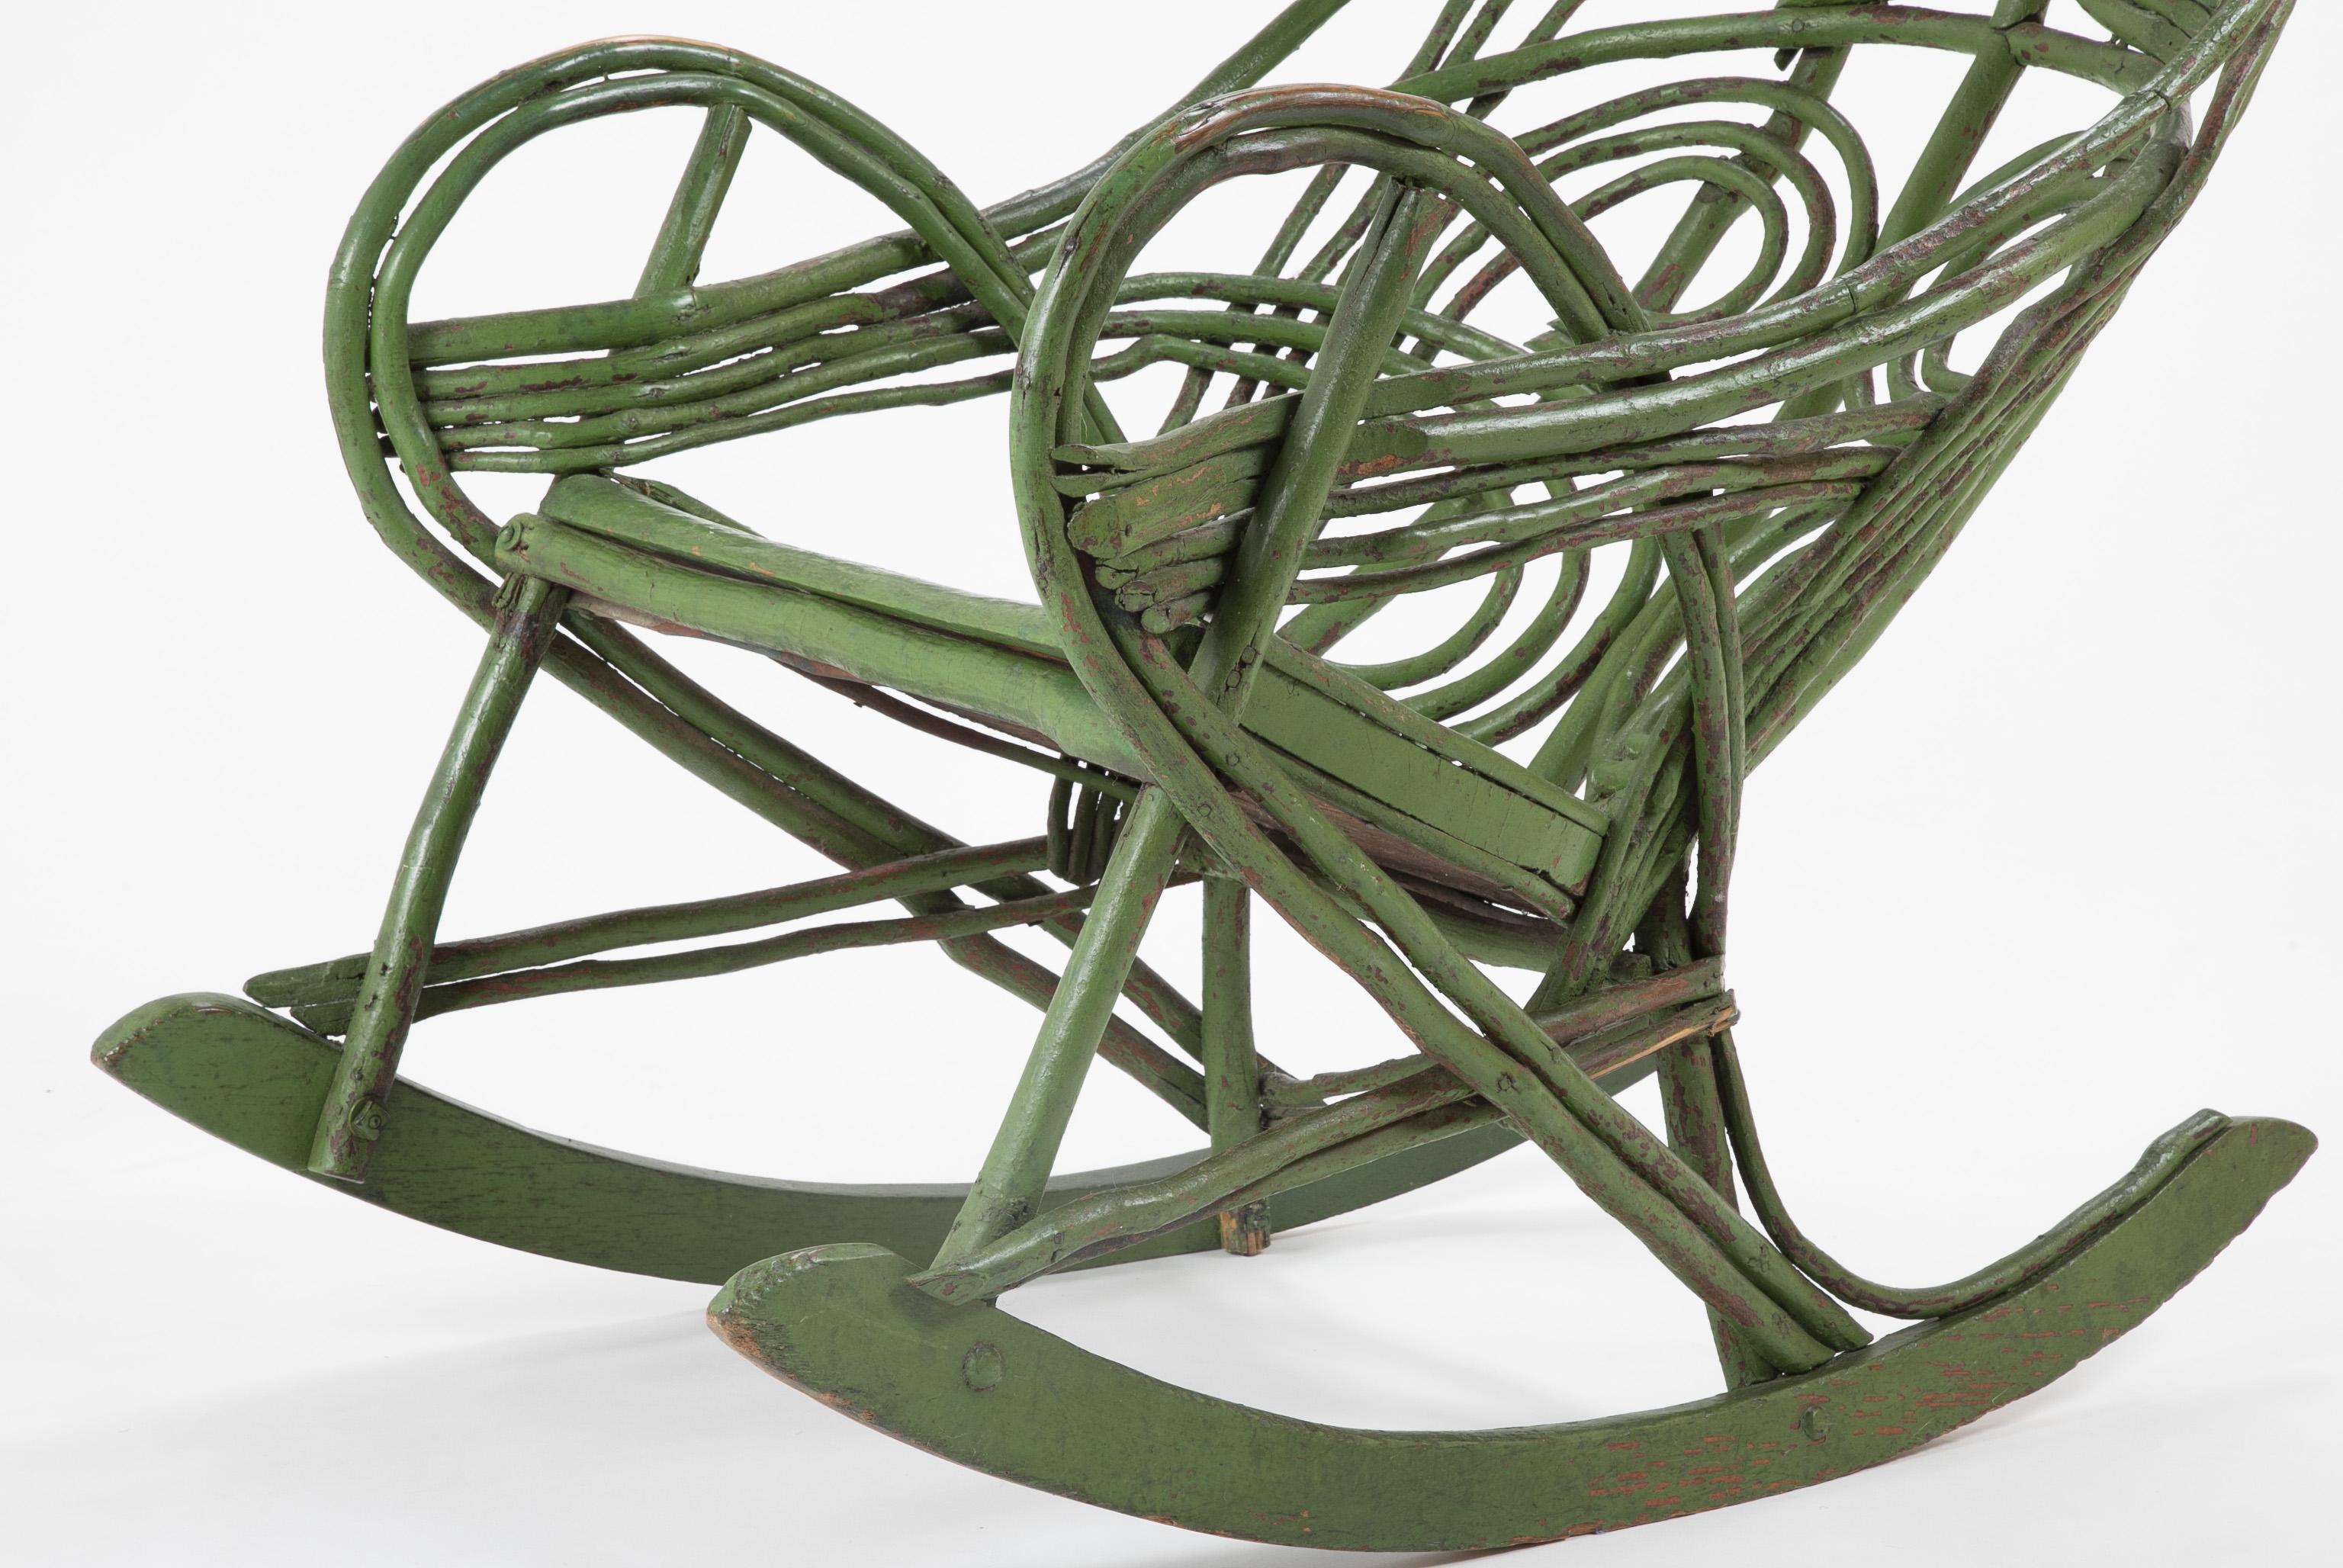 A painted green twig chair assumed to be from the Adirondacks, circa early 20th century.